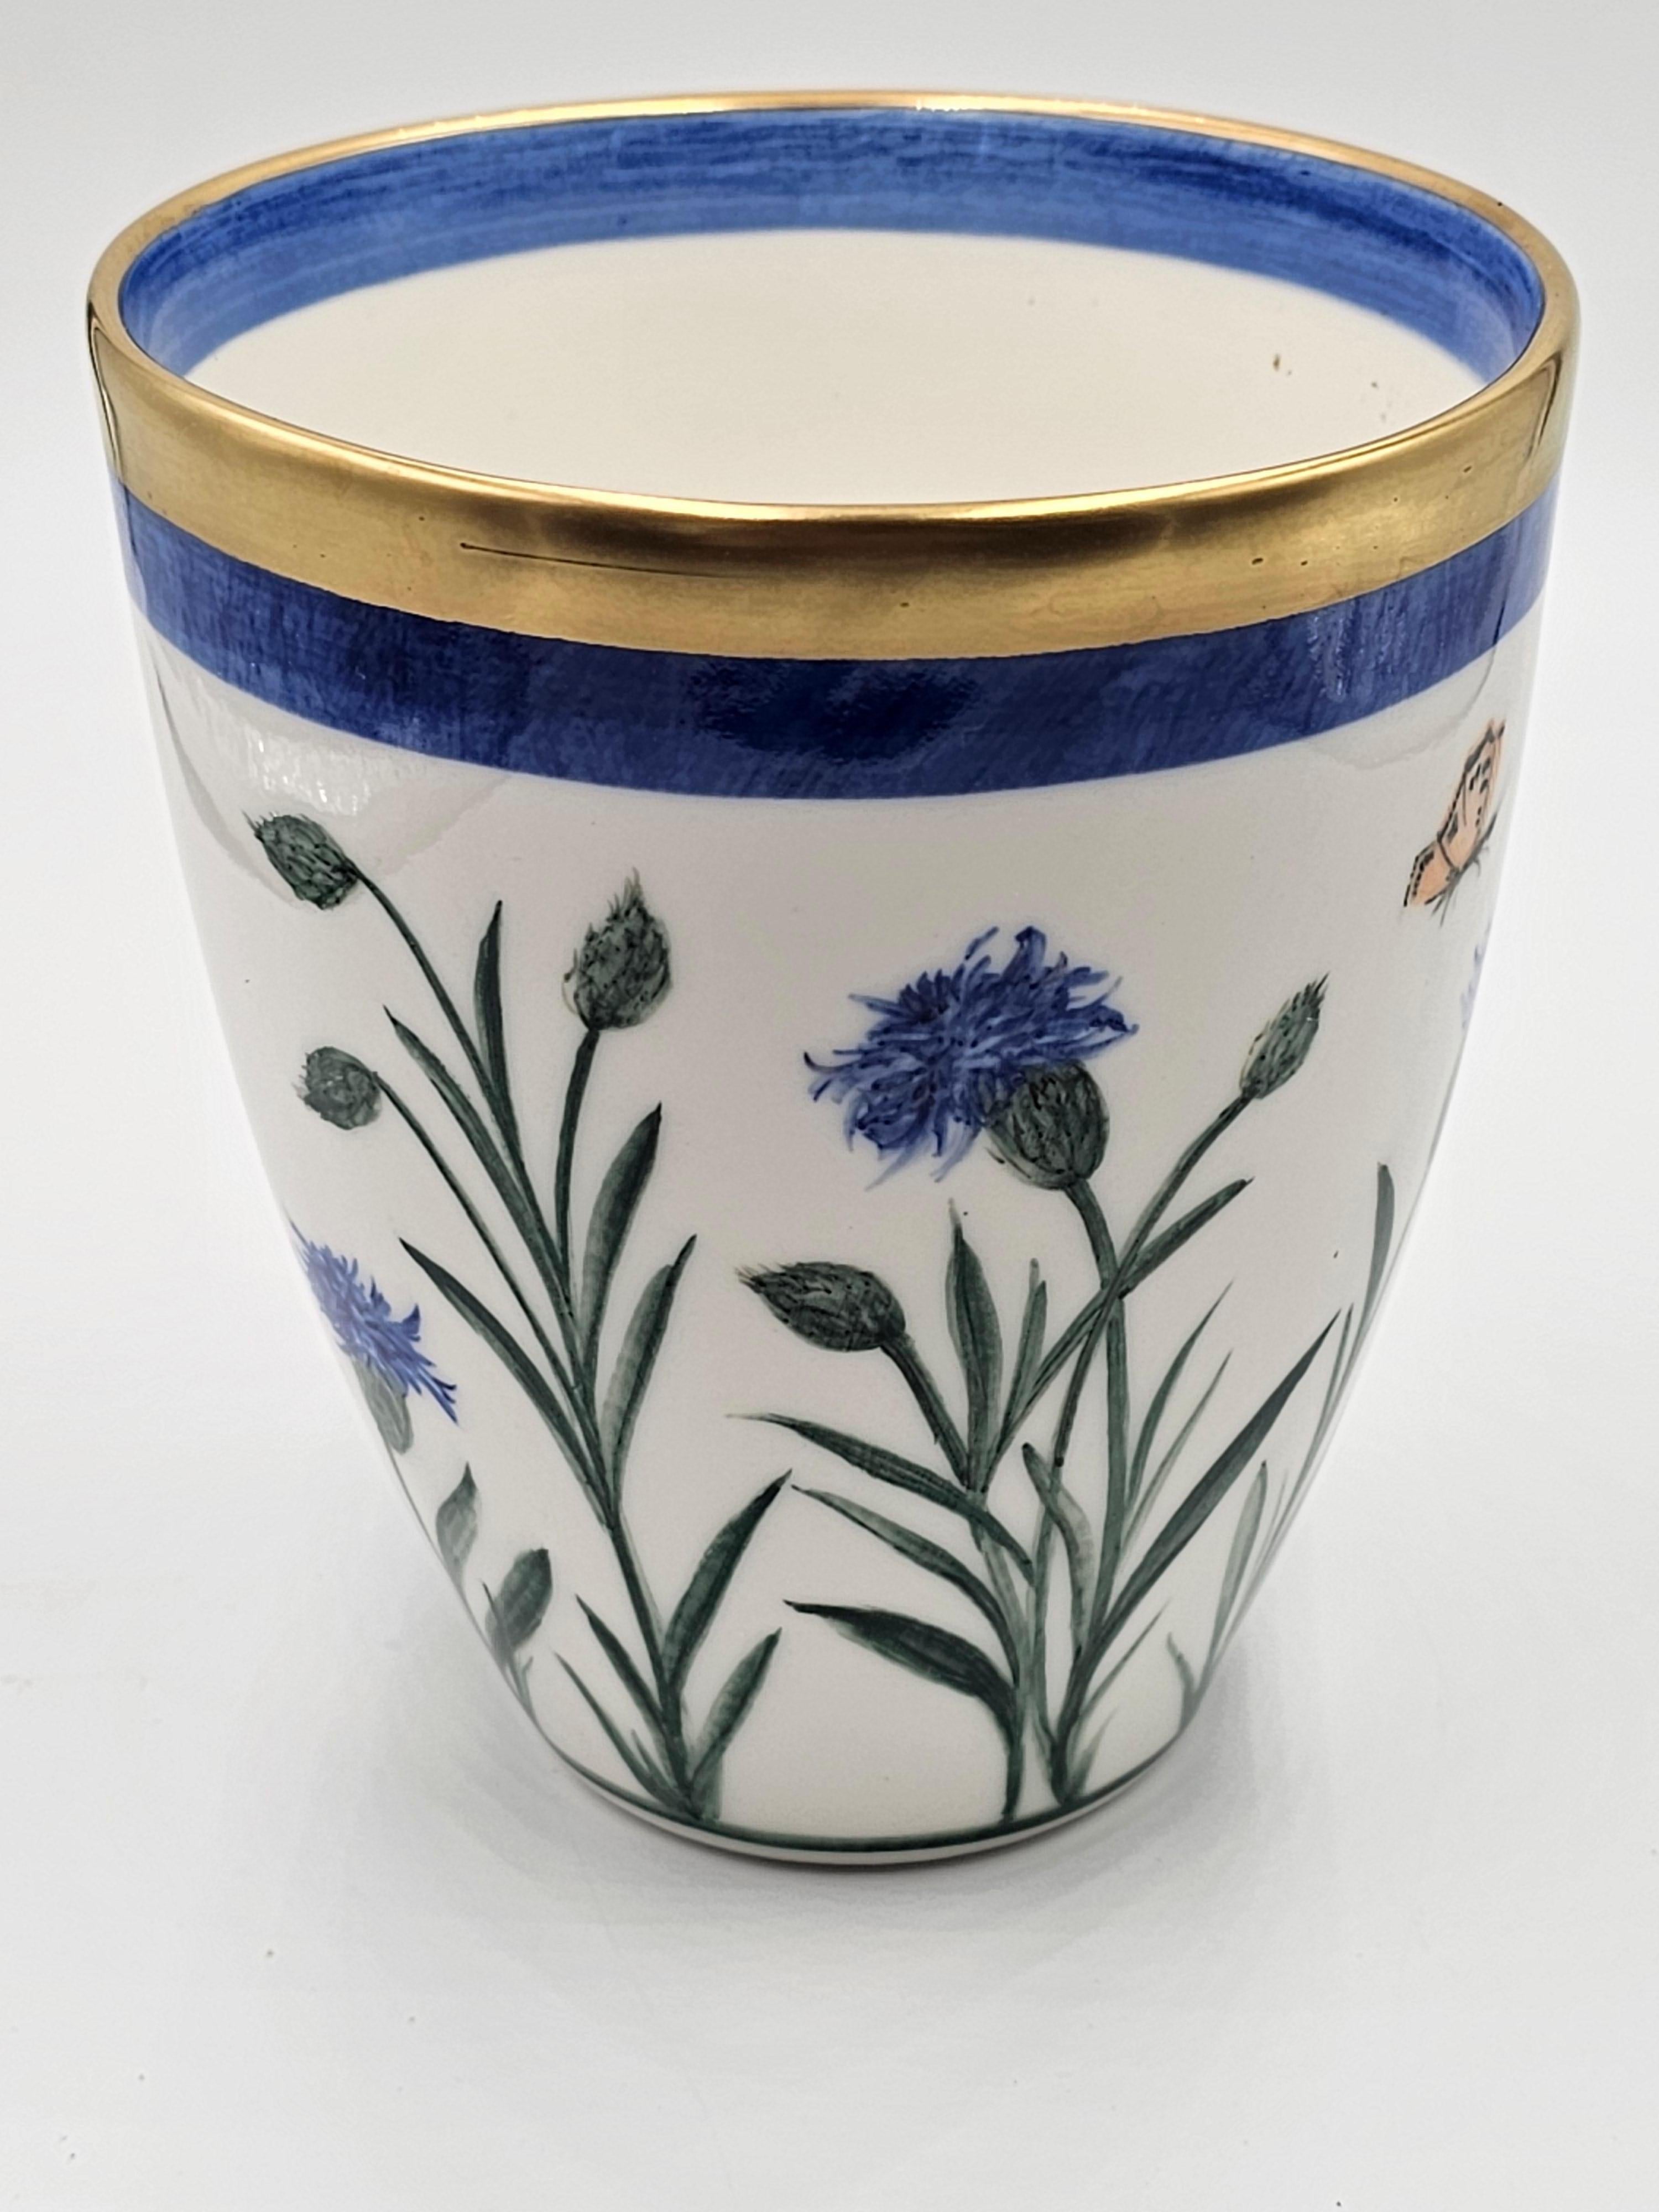 Hands-free painted porcelain vase with a flower decor all around. Rimmed with a platinum rim. Completely made by hand in Bavaria/Germany with a exclusive decor cornflower in blue color for Sofina Boutique Kitzbühel.
Looks beautiful with fresh